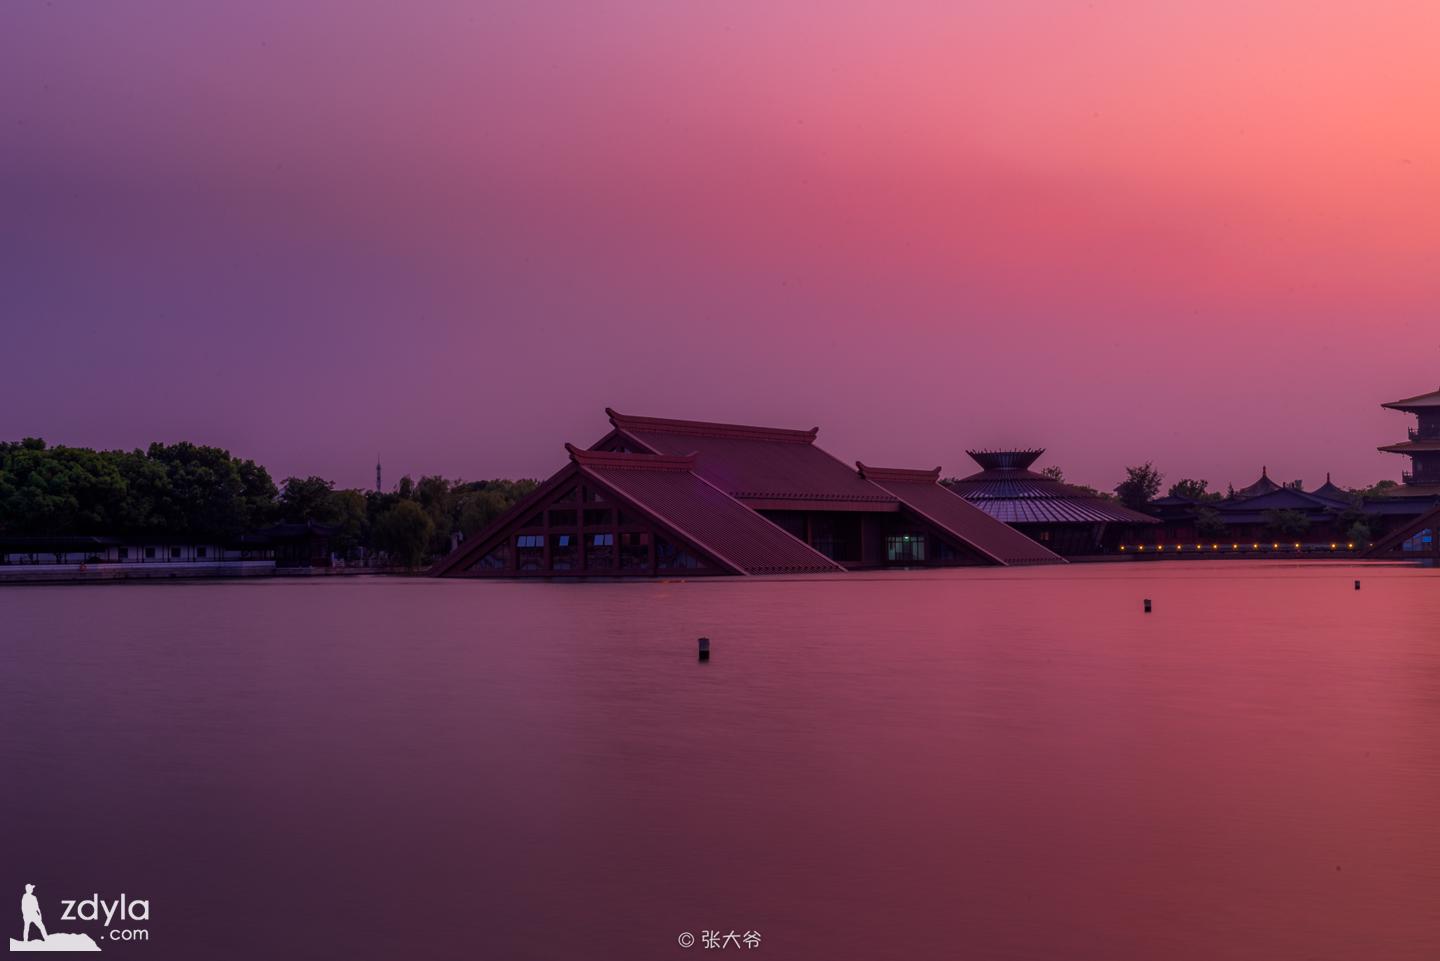 The sunset of Guangfulin